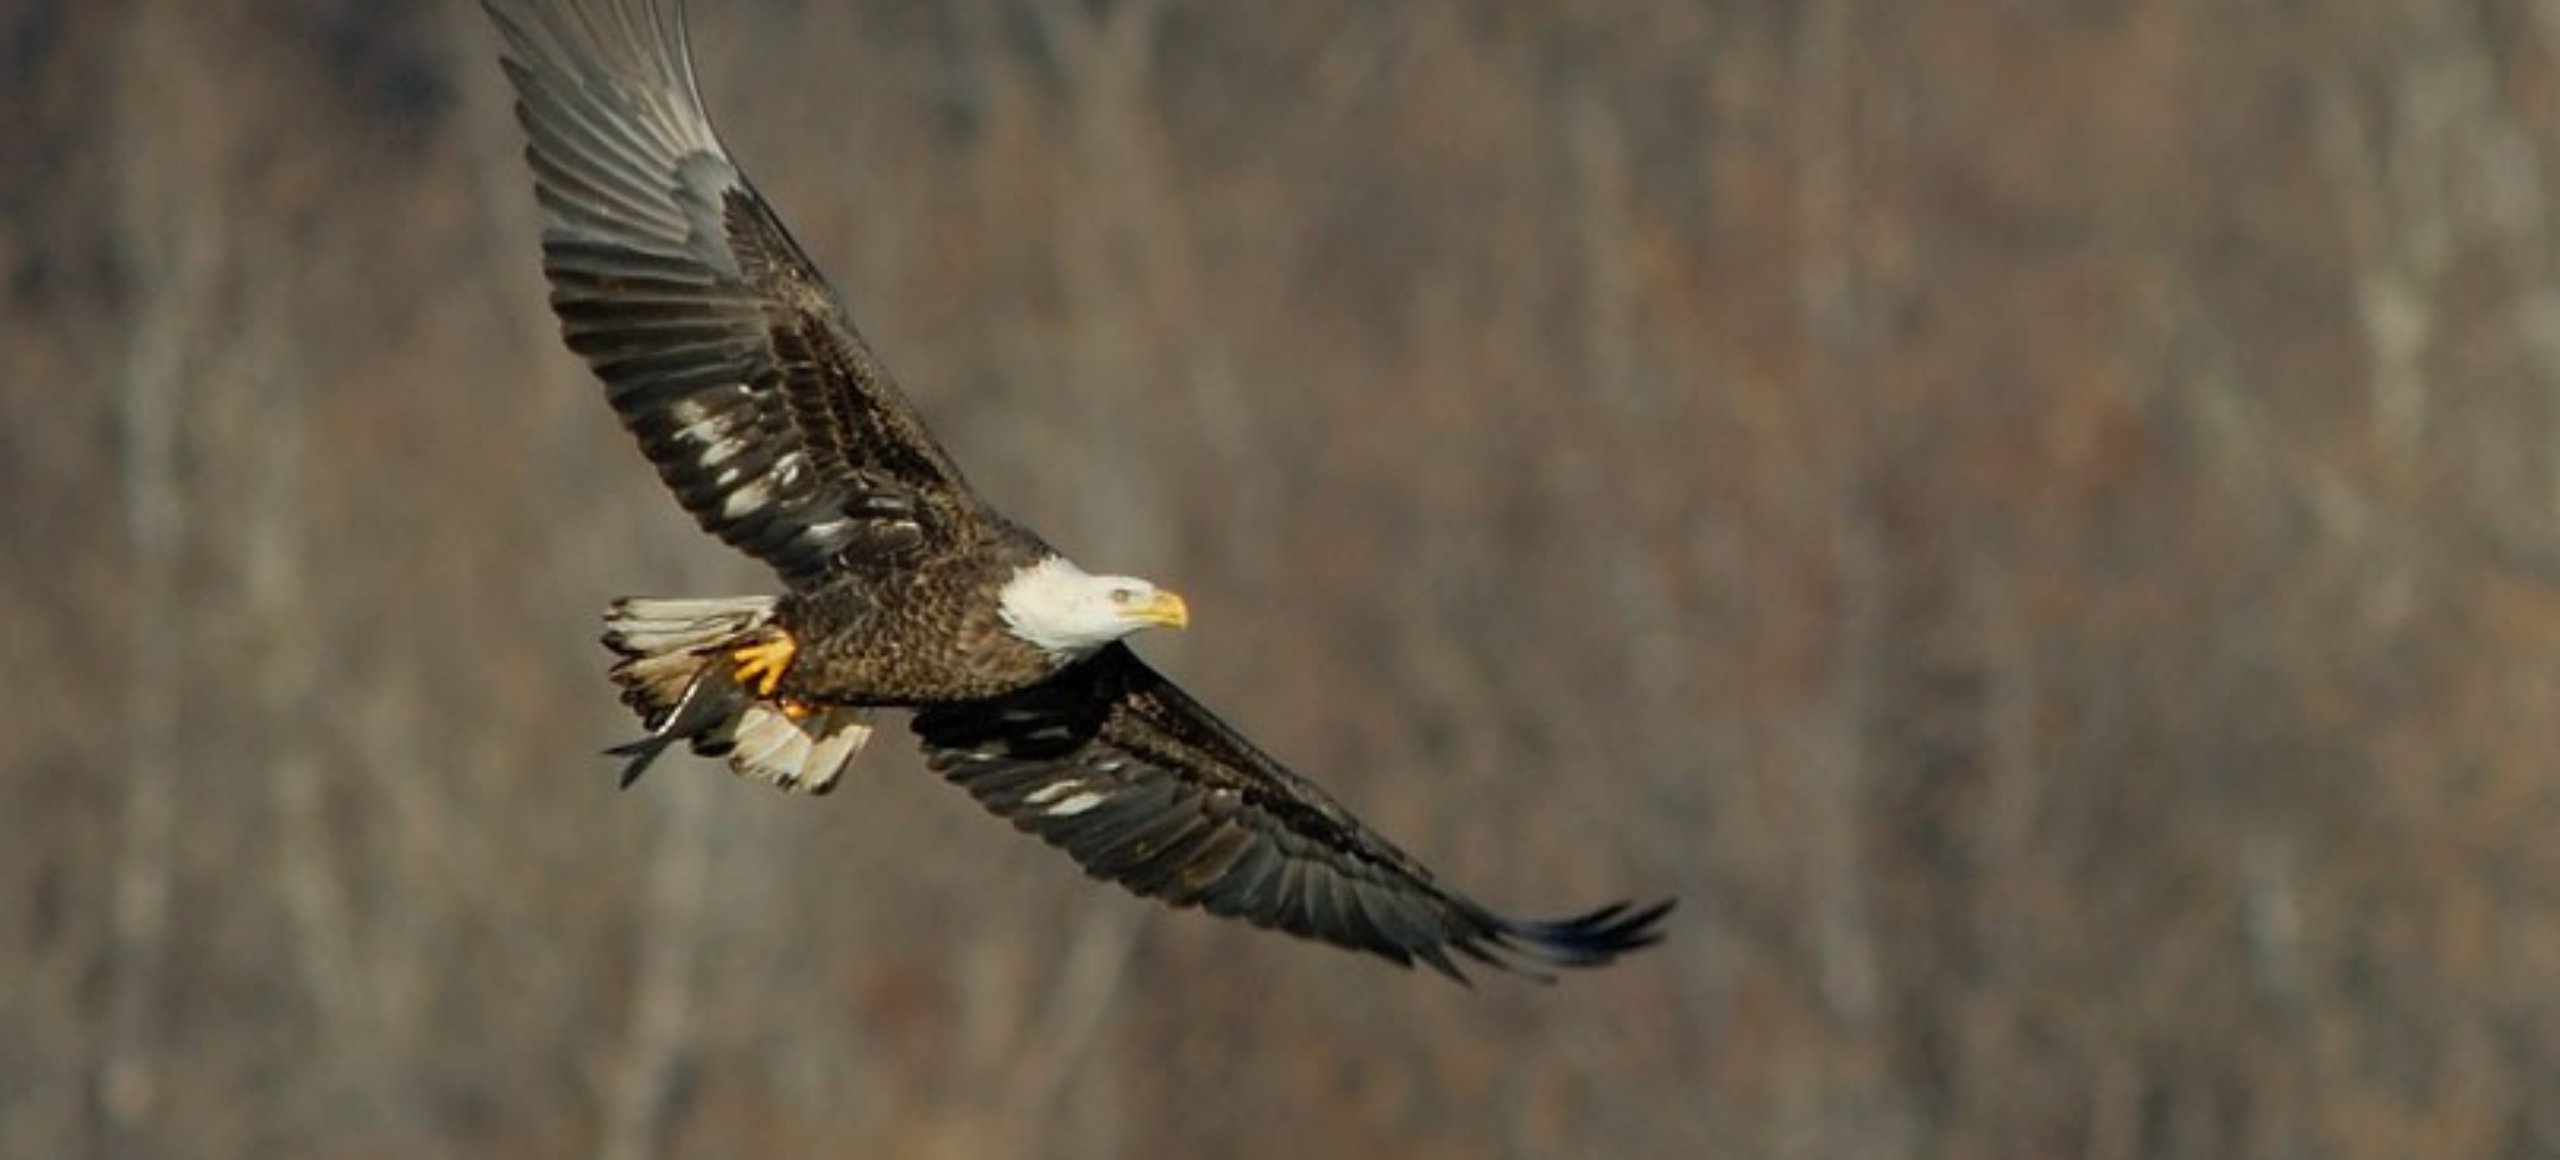 A Bald Eagle with outstretched wings flies in front of a blurred brown background.